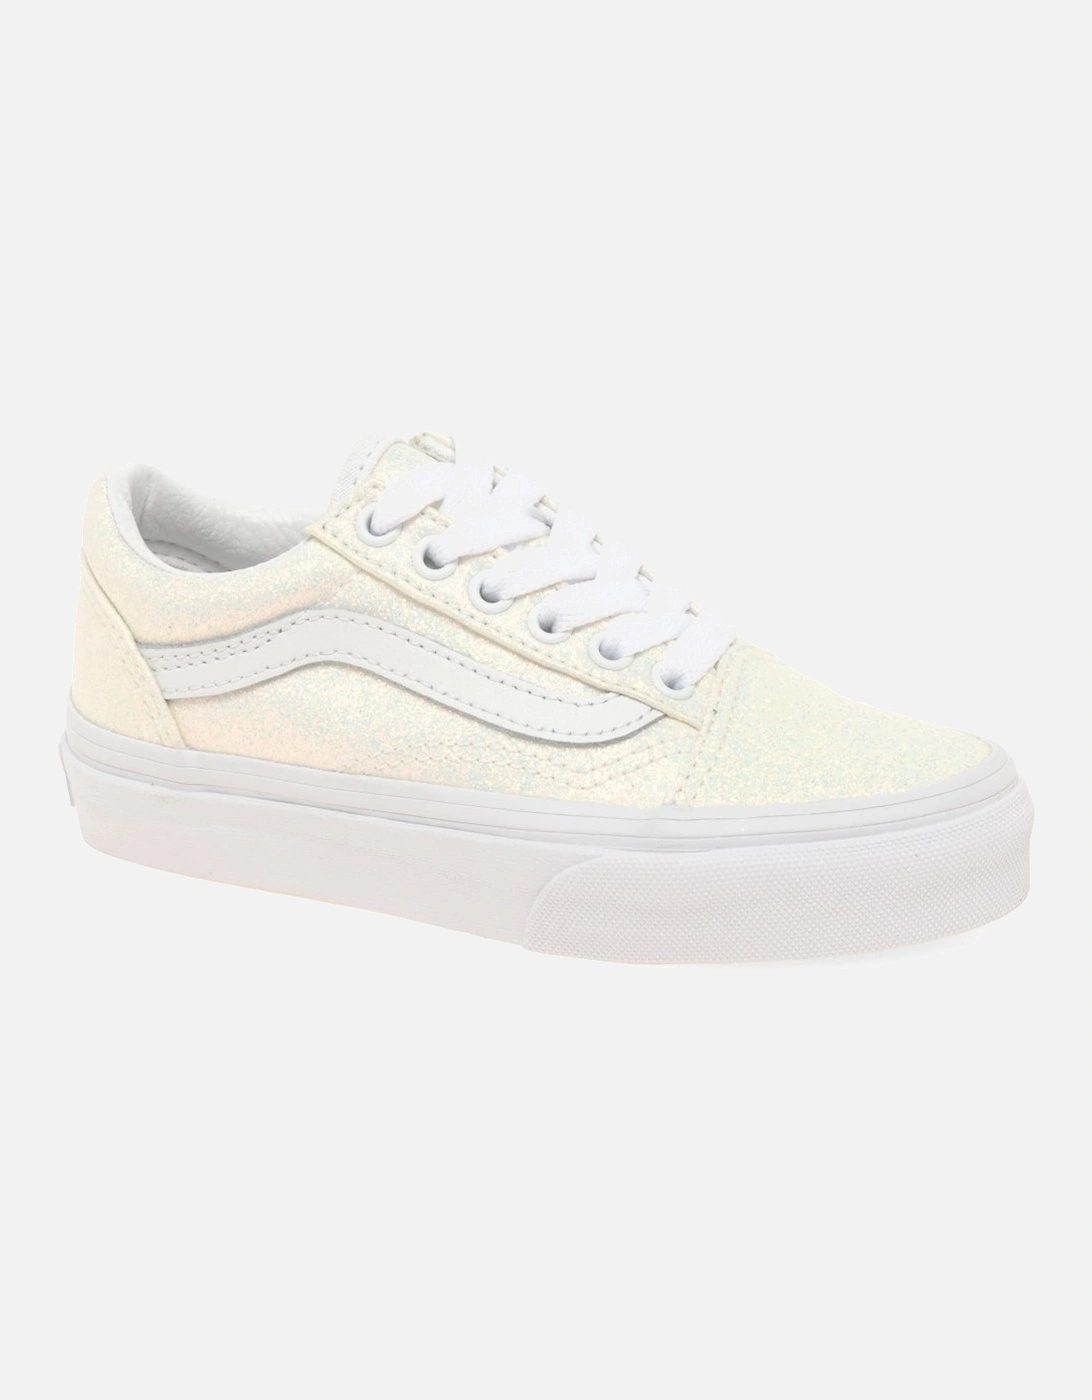 Girl's Old Skool Lace Girls Youth Canvas Shoes - Size: 11.5